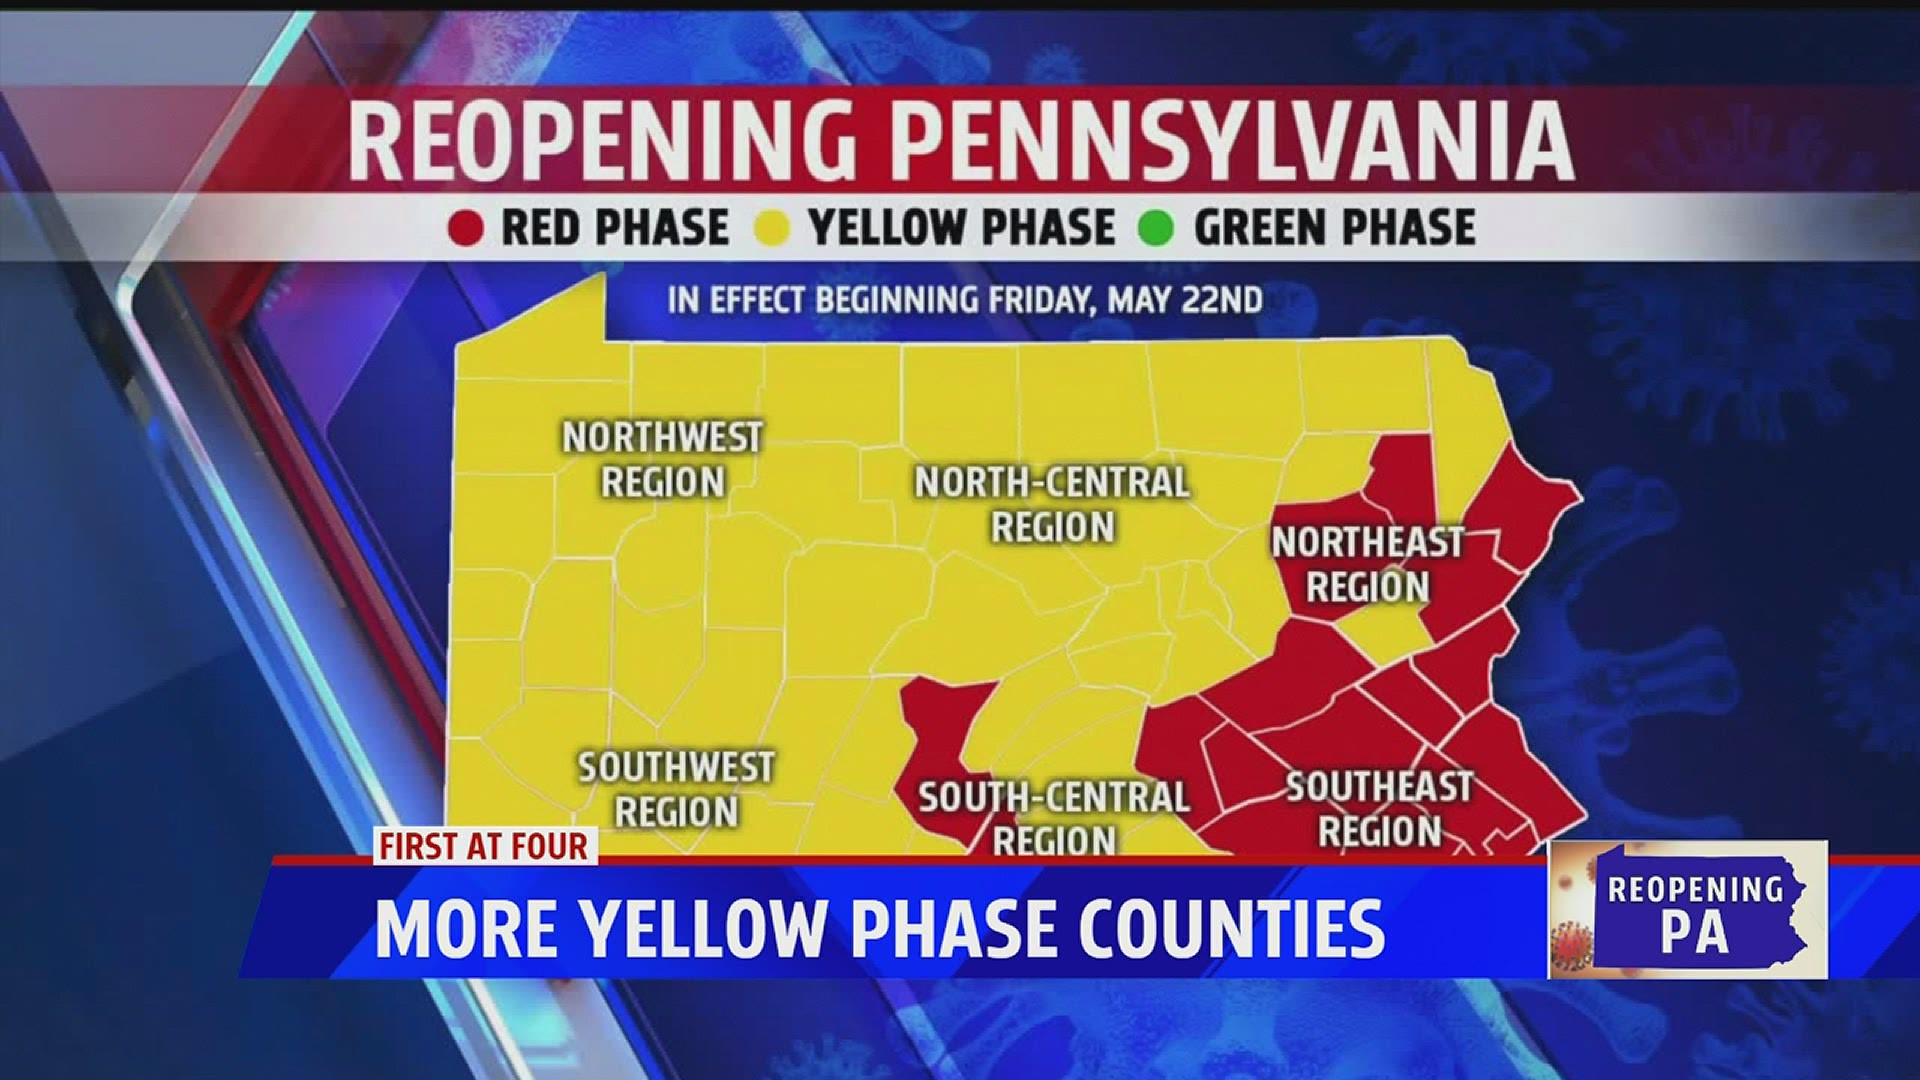 The list of counties includes some in our area, such as Adams, Cumberland, Juniata, Mifflin, Perry, and York.